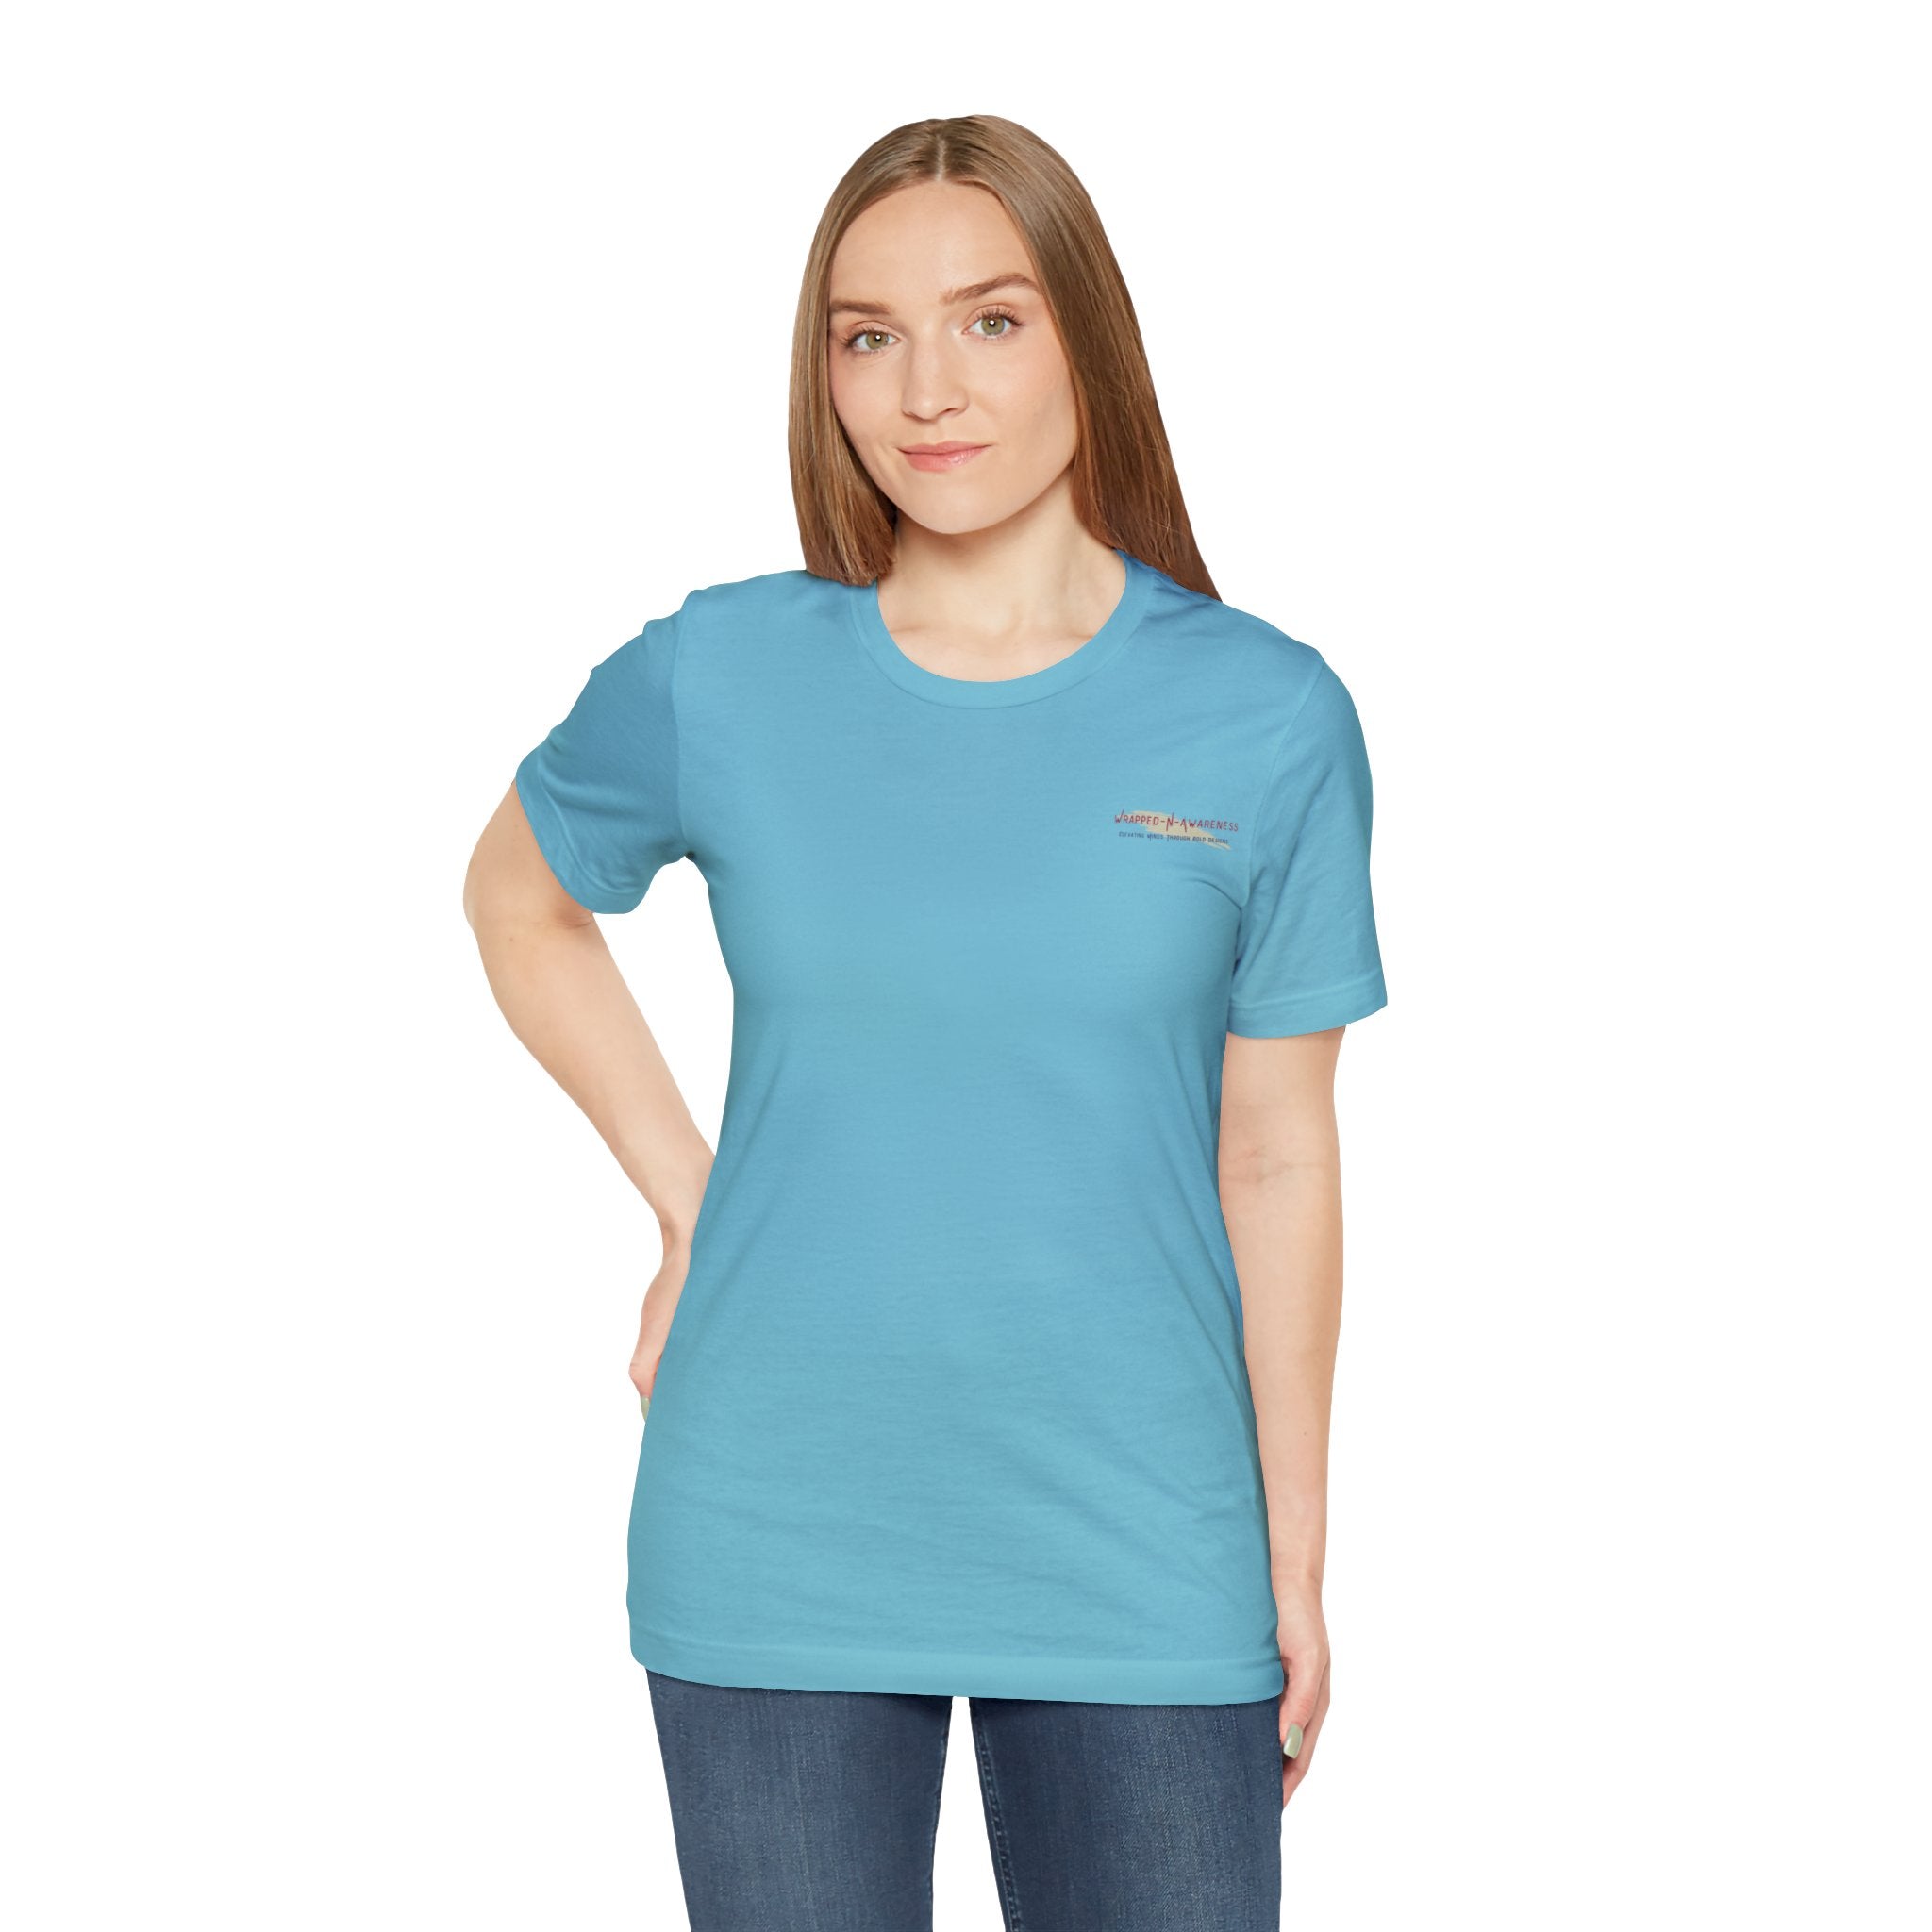 Embrace Self-Care Jersey Tee - Bella+Canvas 3001 Heather Mauve Airlume Cotton Bella+Canvas 3001 Crew Neckline Jersey Short Sleeve Lightweight Fabric Mental Health Support Retail Fit Tear-away Label Tee Unisex Tee T-Shirt 5707872836254526123_2048 Printify